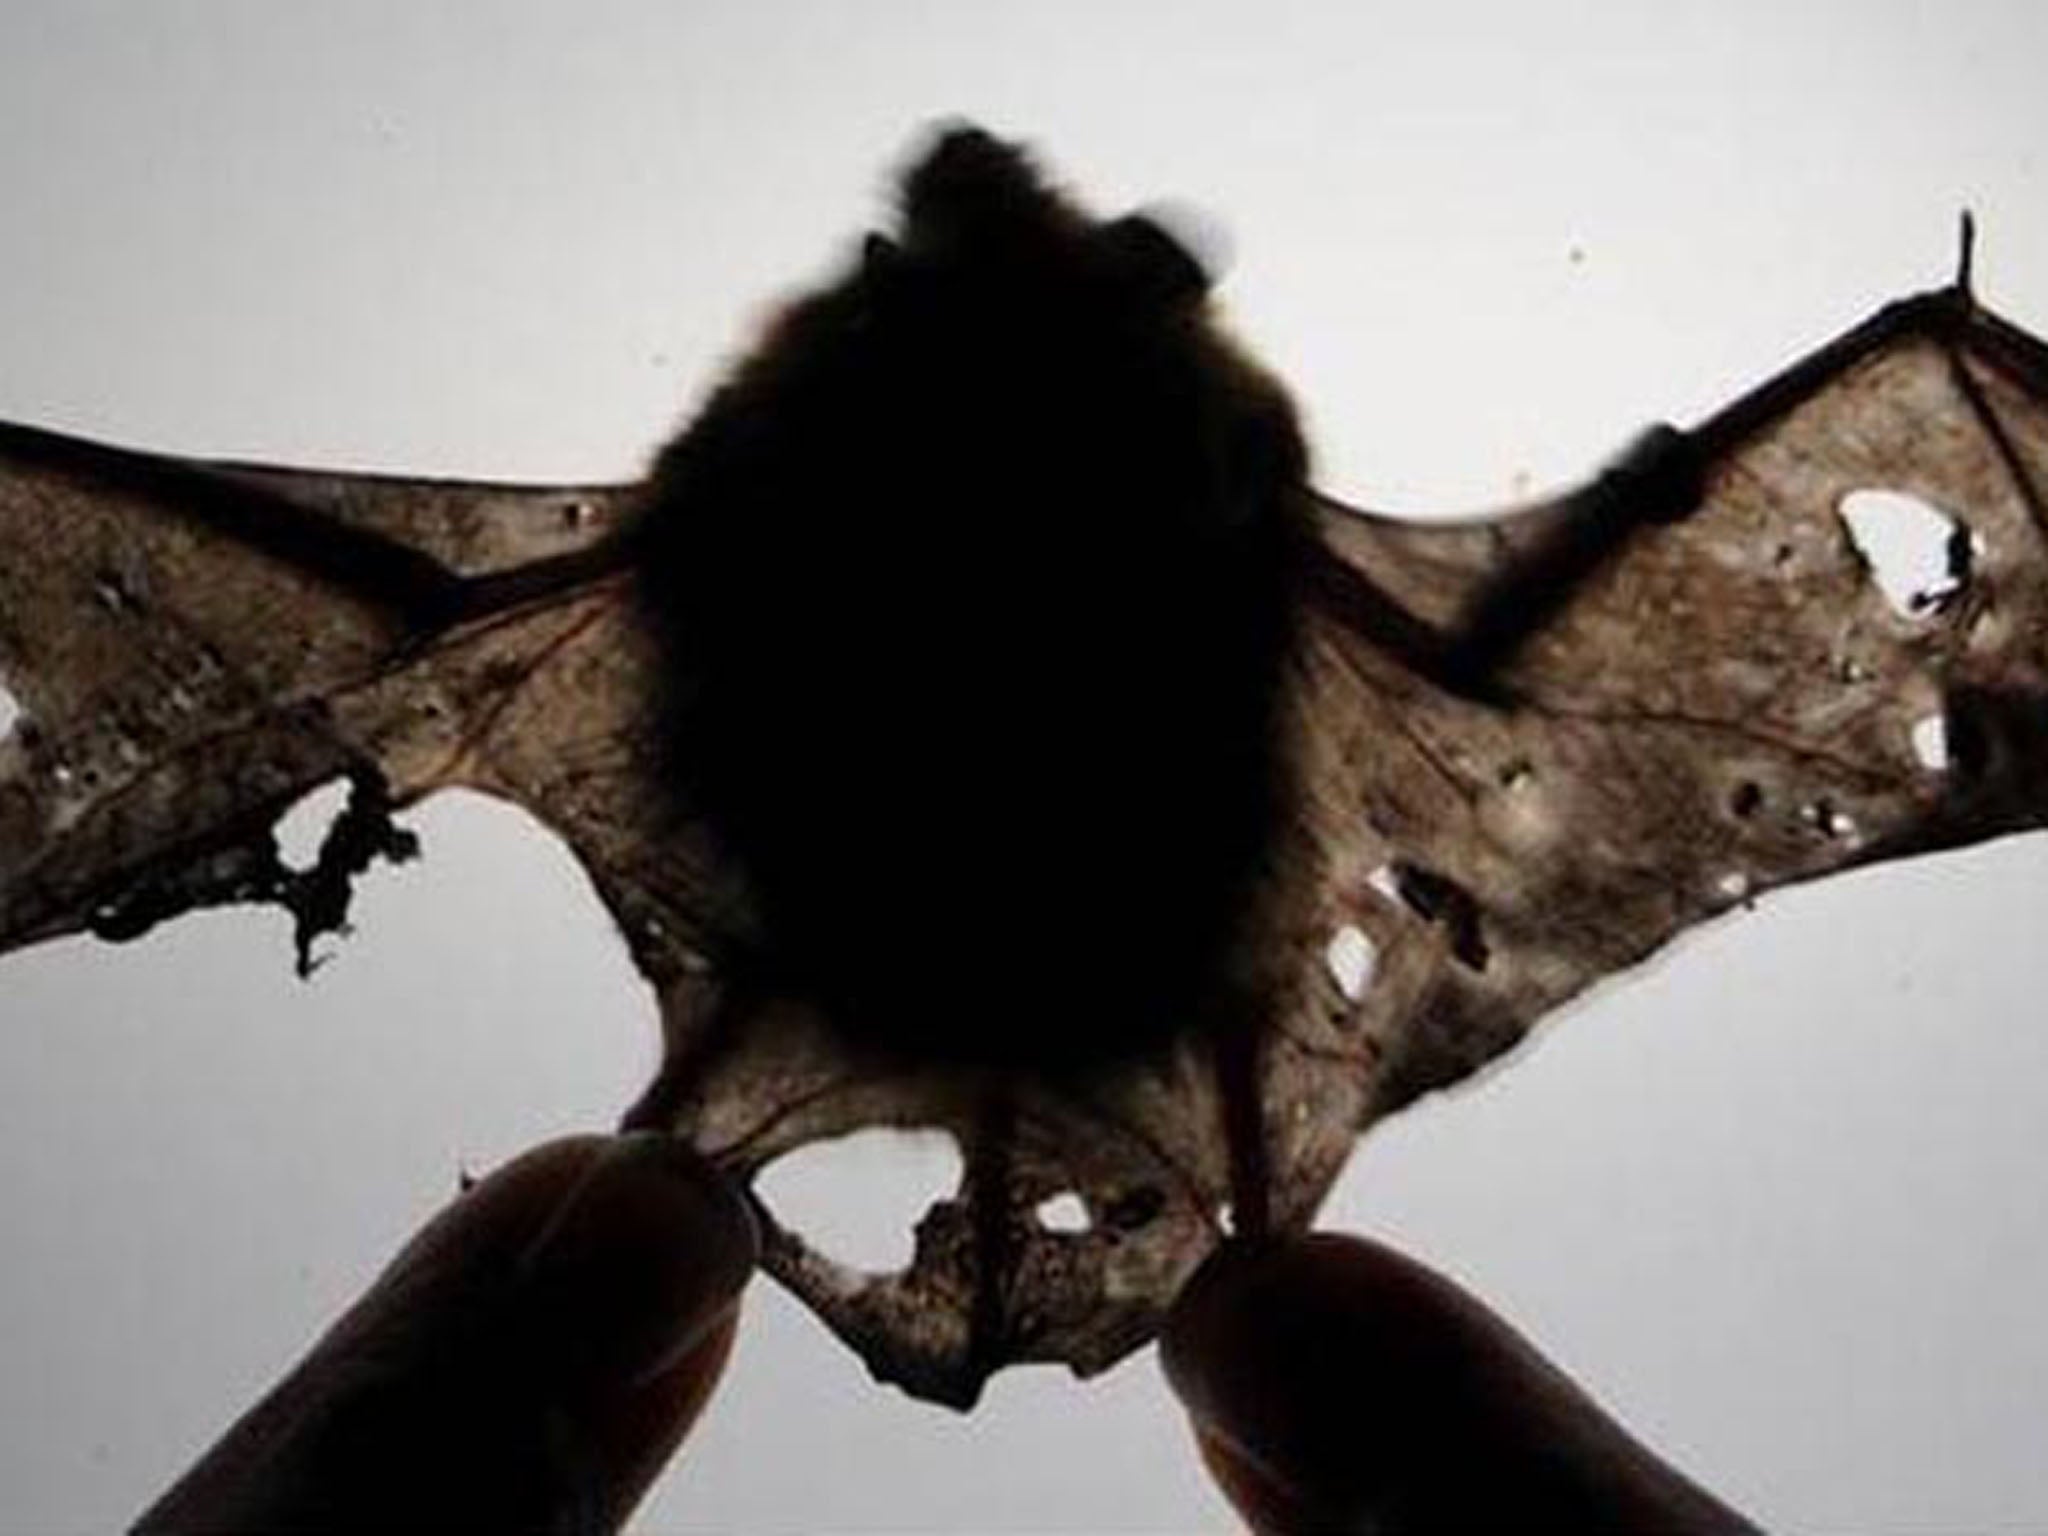 BATS: A small brown bat is shown in May after coming out of hibernation with torn wings, a symptom associated with Immune Reconstitution Inflammatory Syndrome